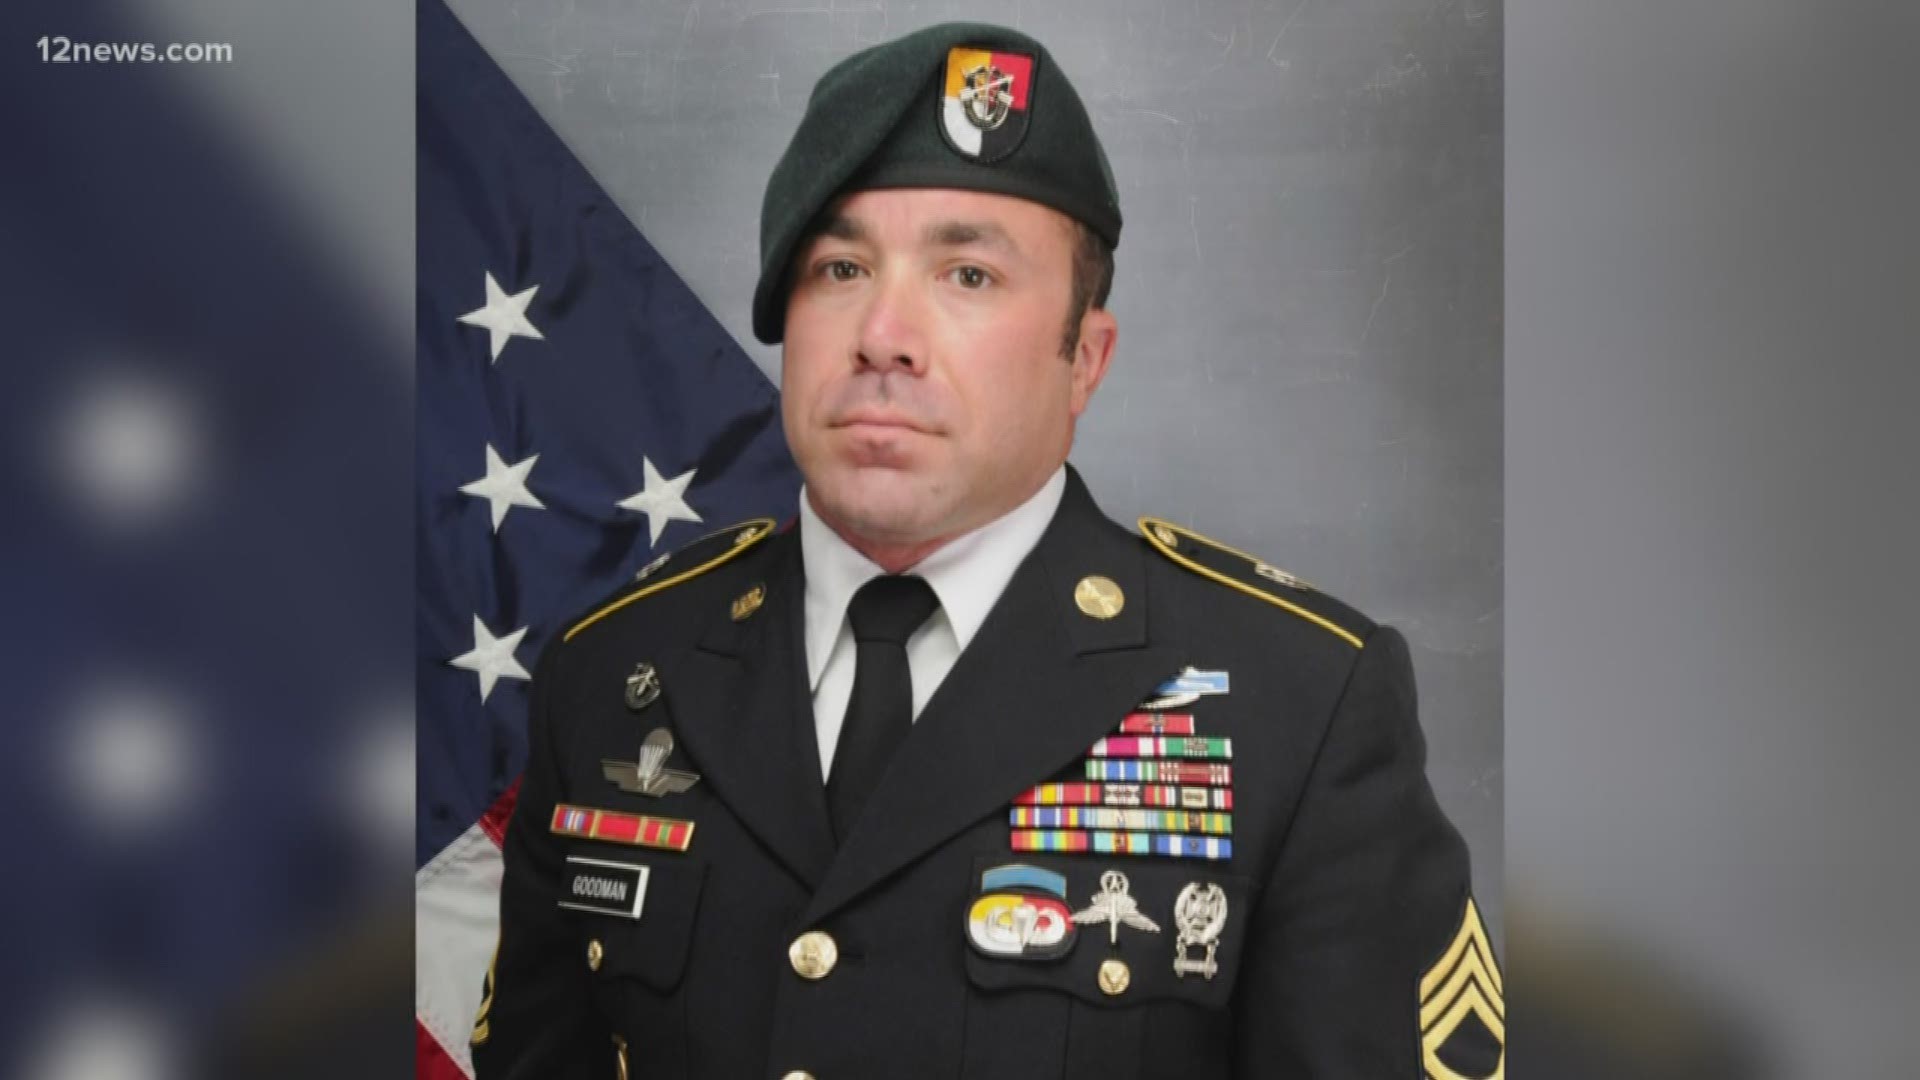 Master Sgt. Nathan Goodman was identified as the soldier who died during free-fall training near Eloy Tuesday. The 36-year-old was in Arizona from North Carolina.